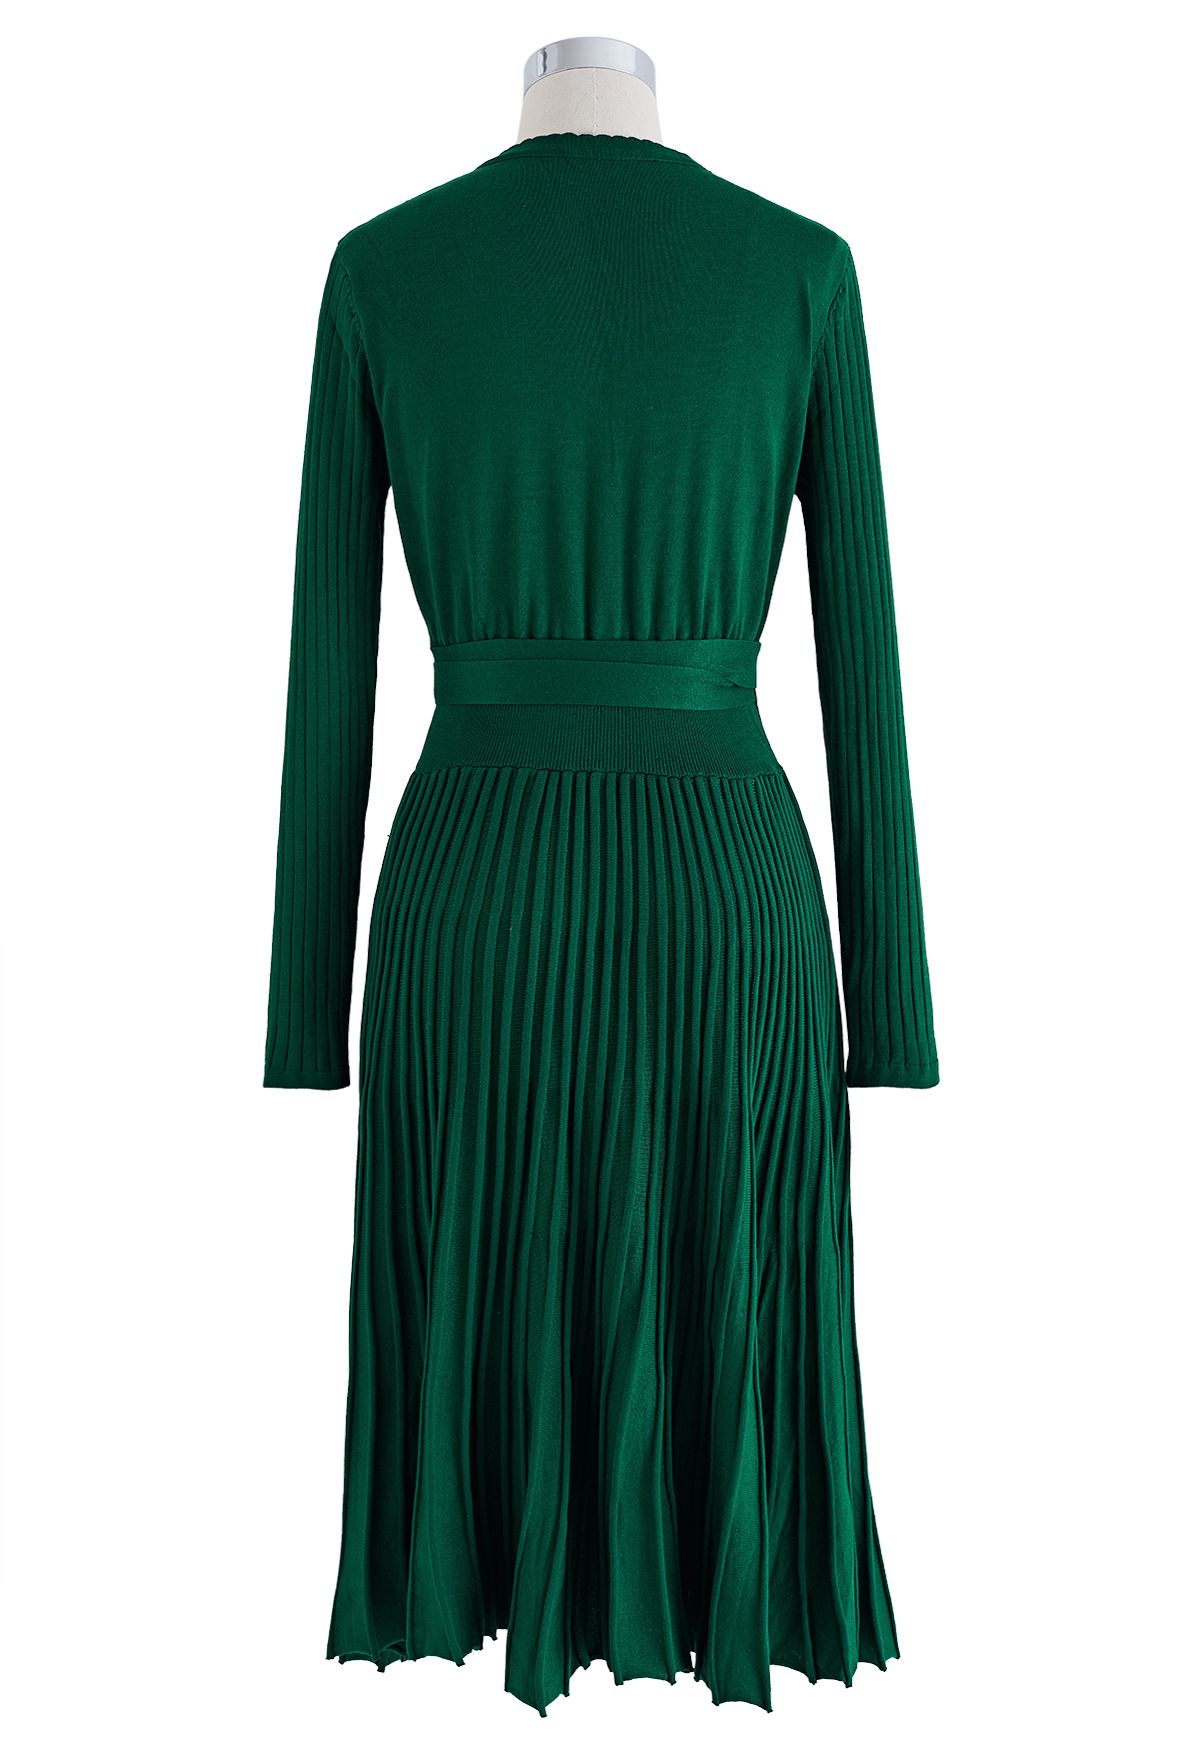 Embrace a Lithe Knitted Dress in Emerald - Retro, Indie and Unique Fashion